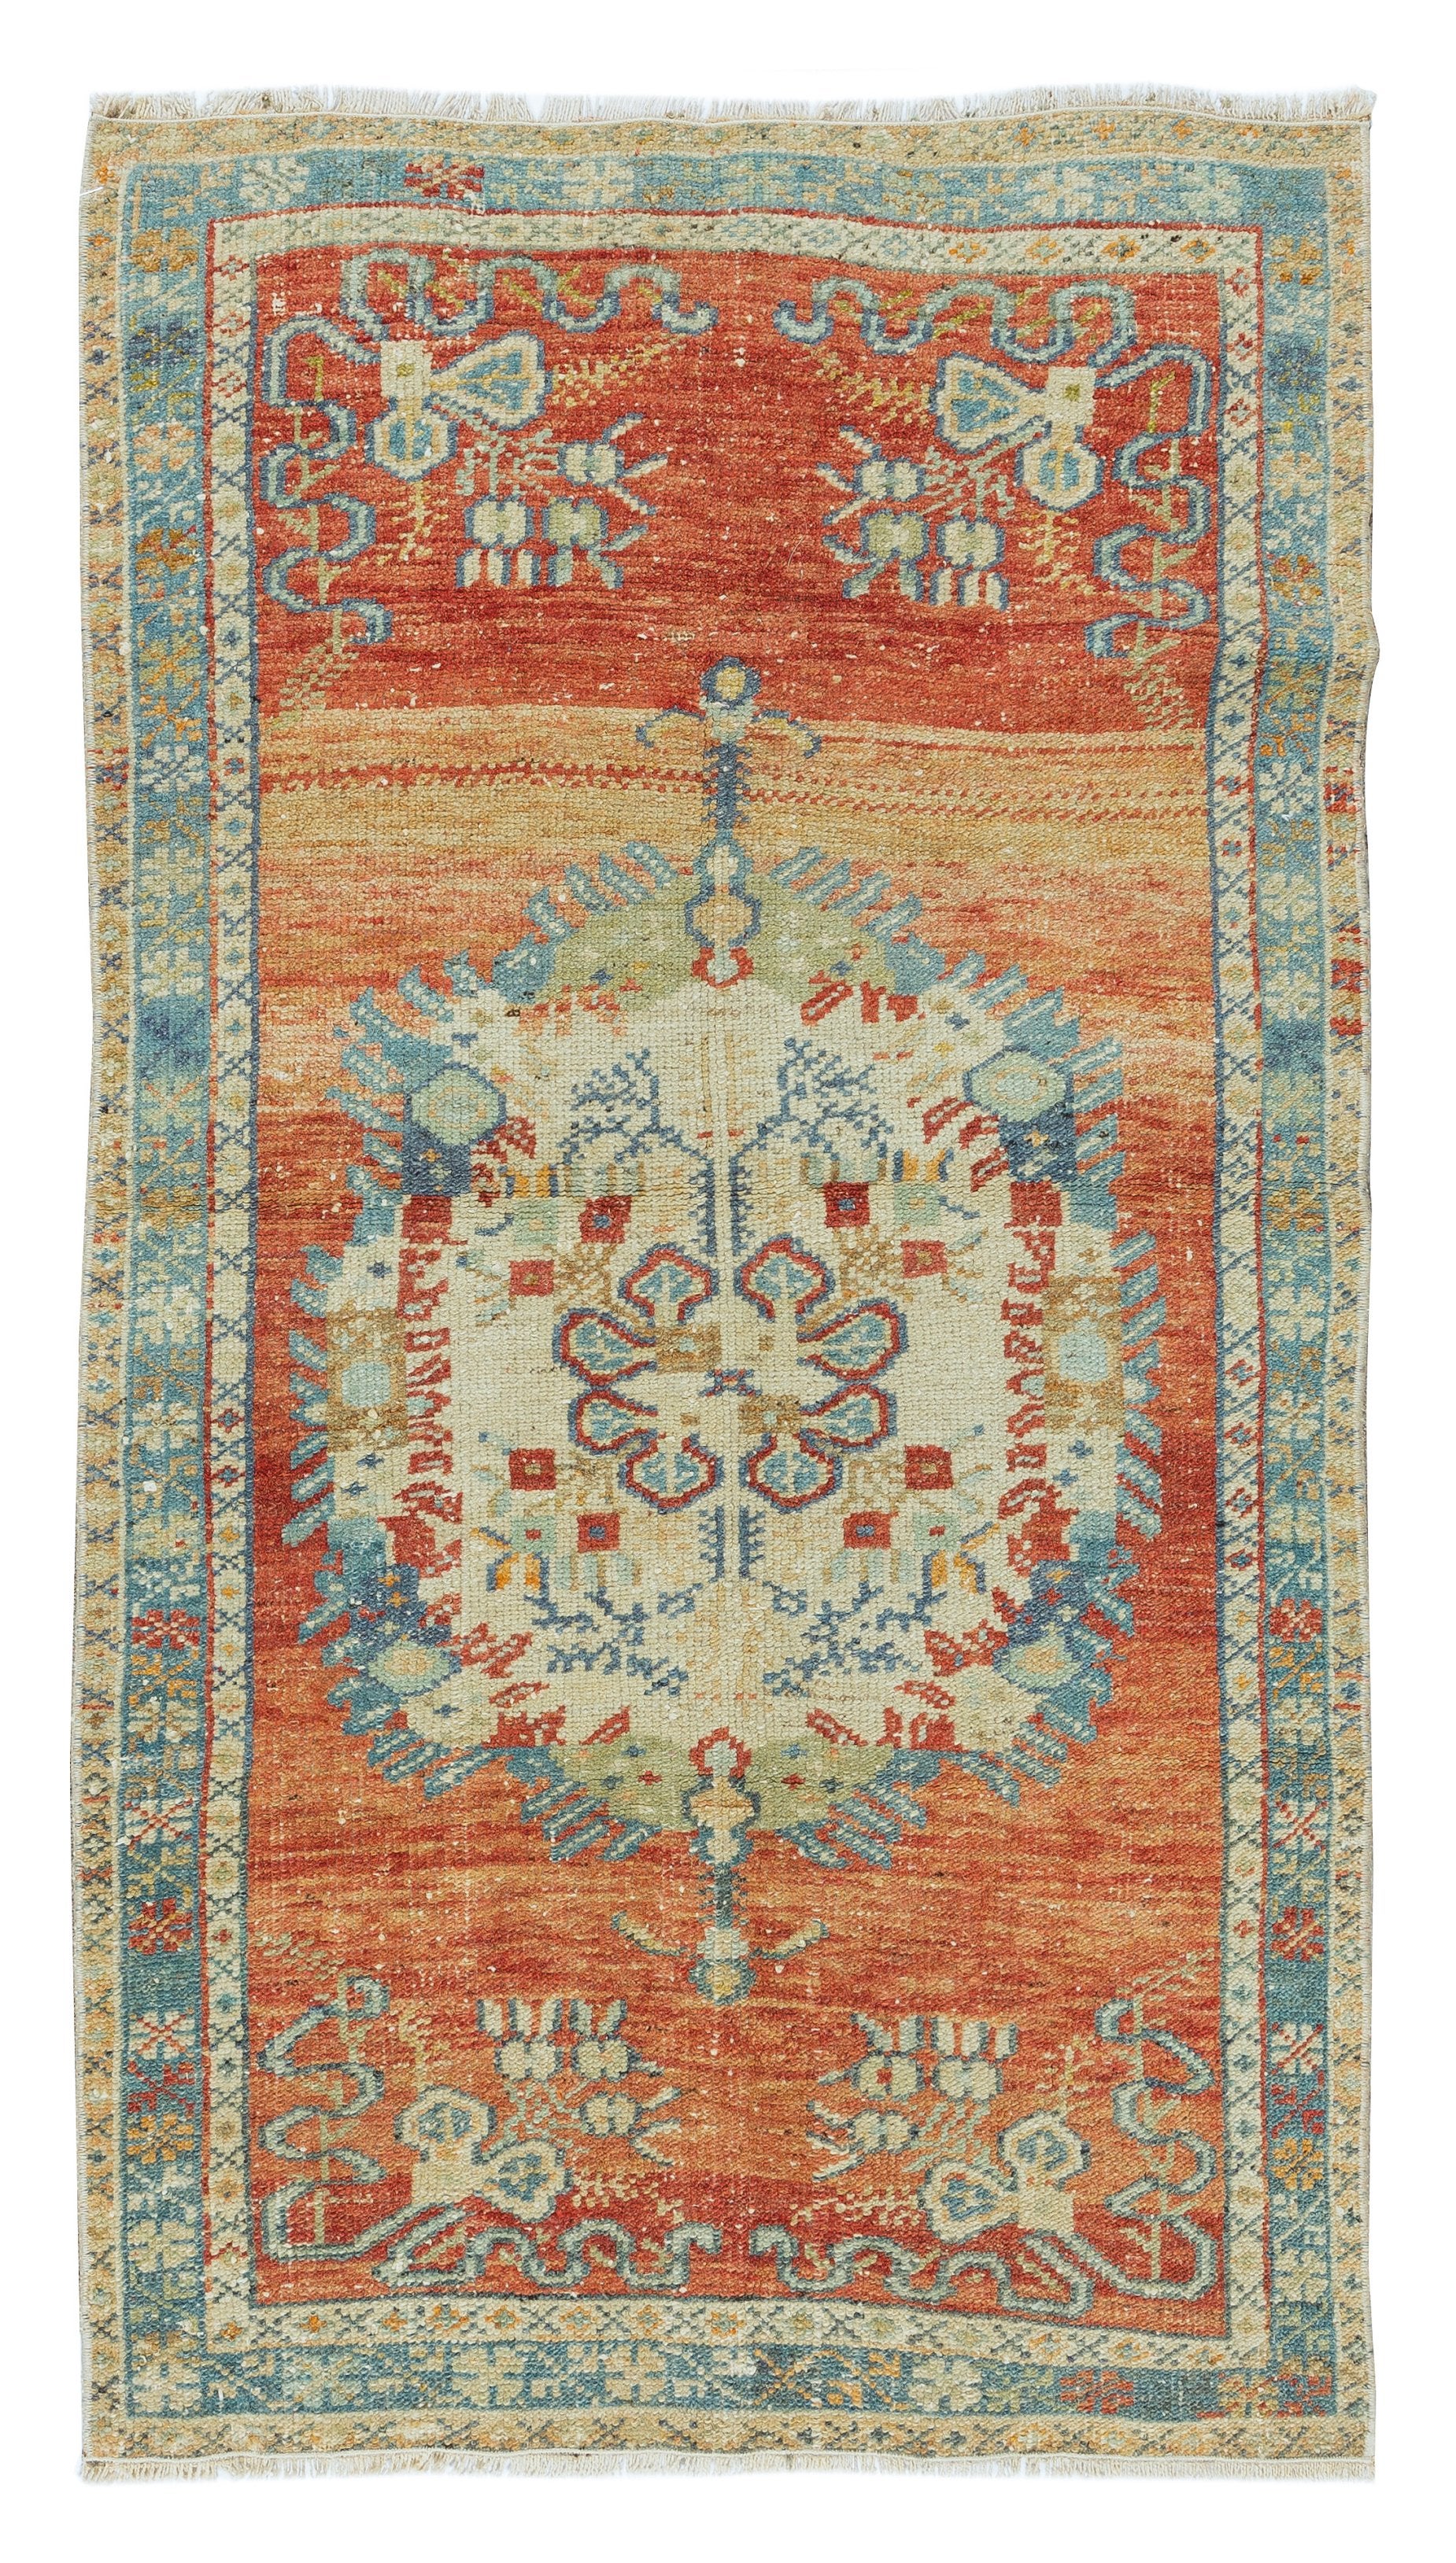 31"x56" Ft Vintage Hand Knotted Turkish Accent Rug, Circa 1960, Floor Covering For Sale